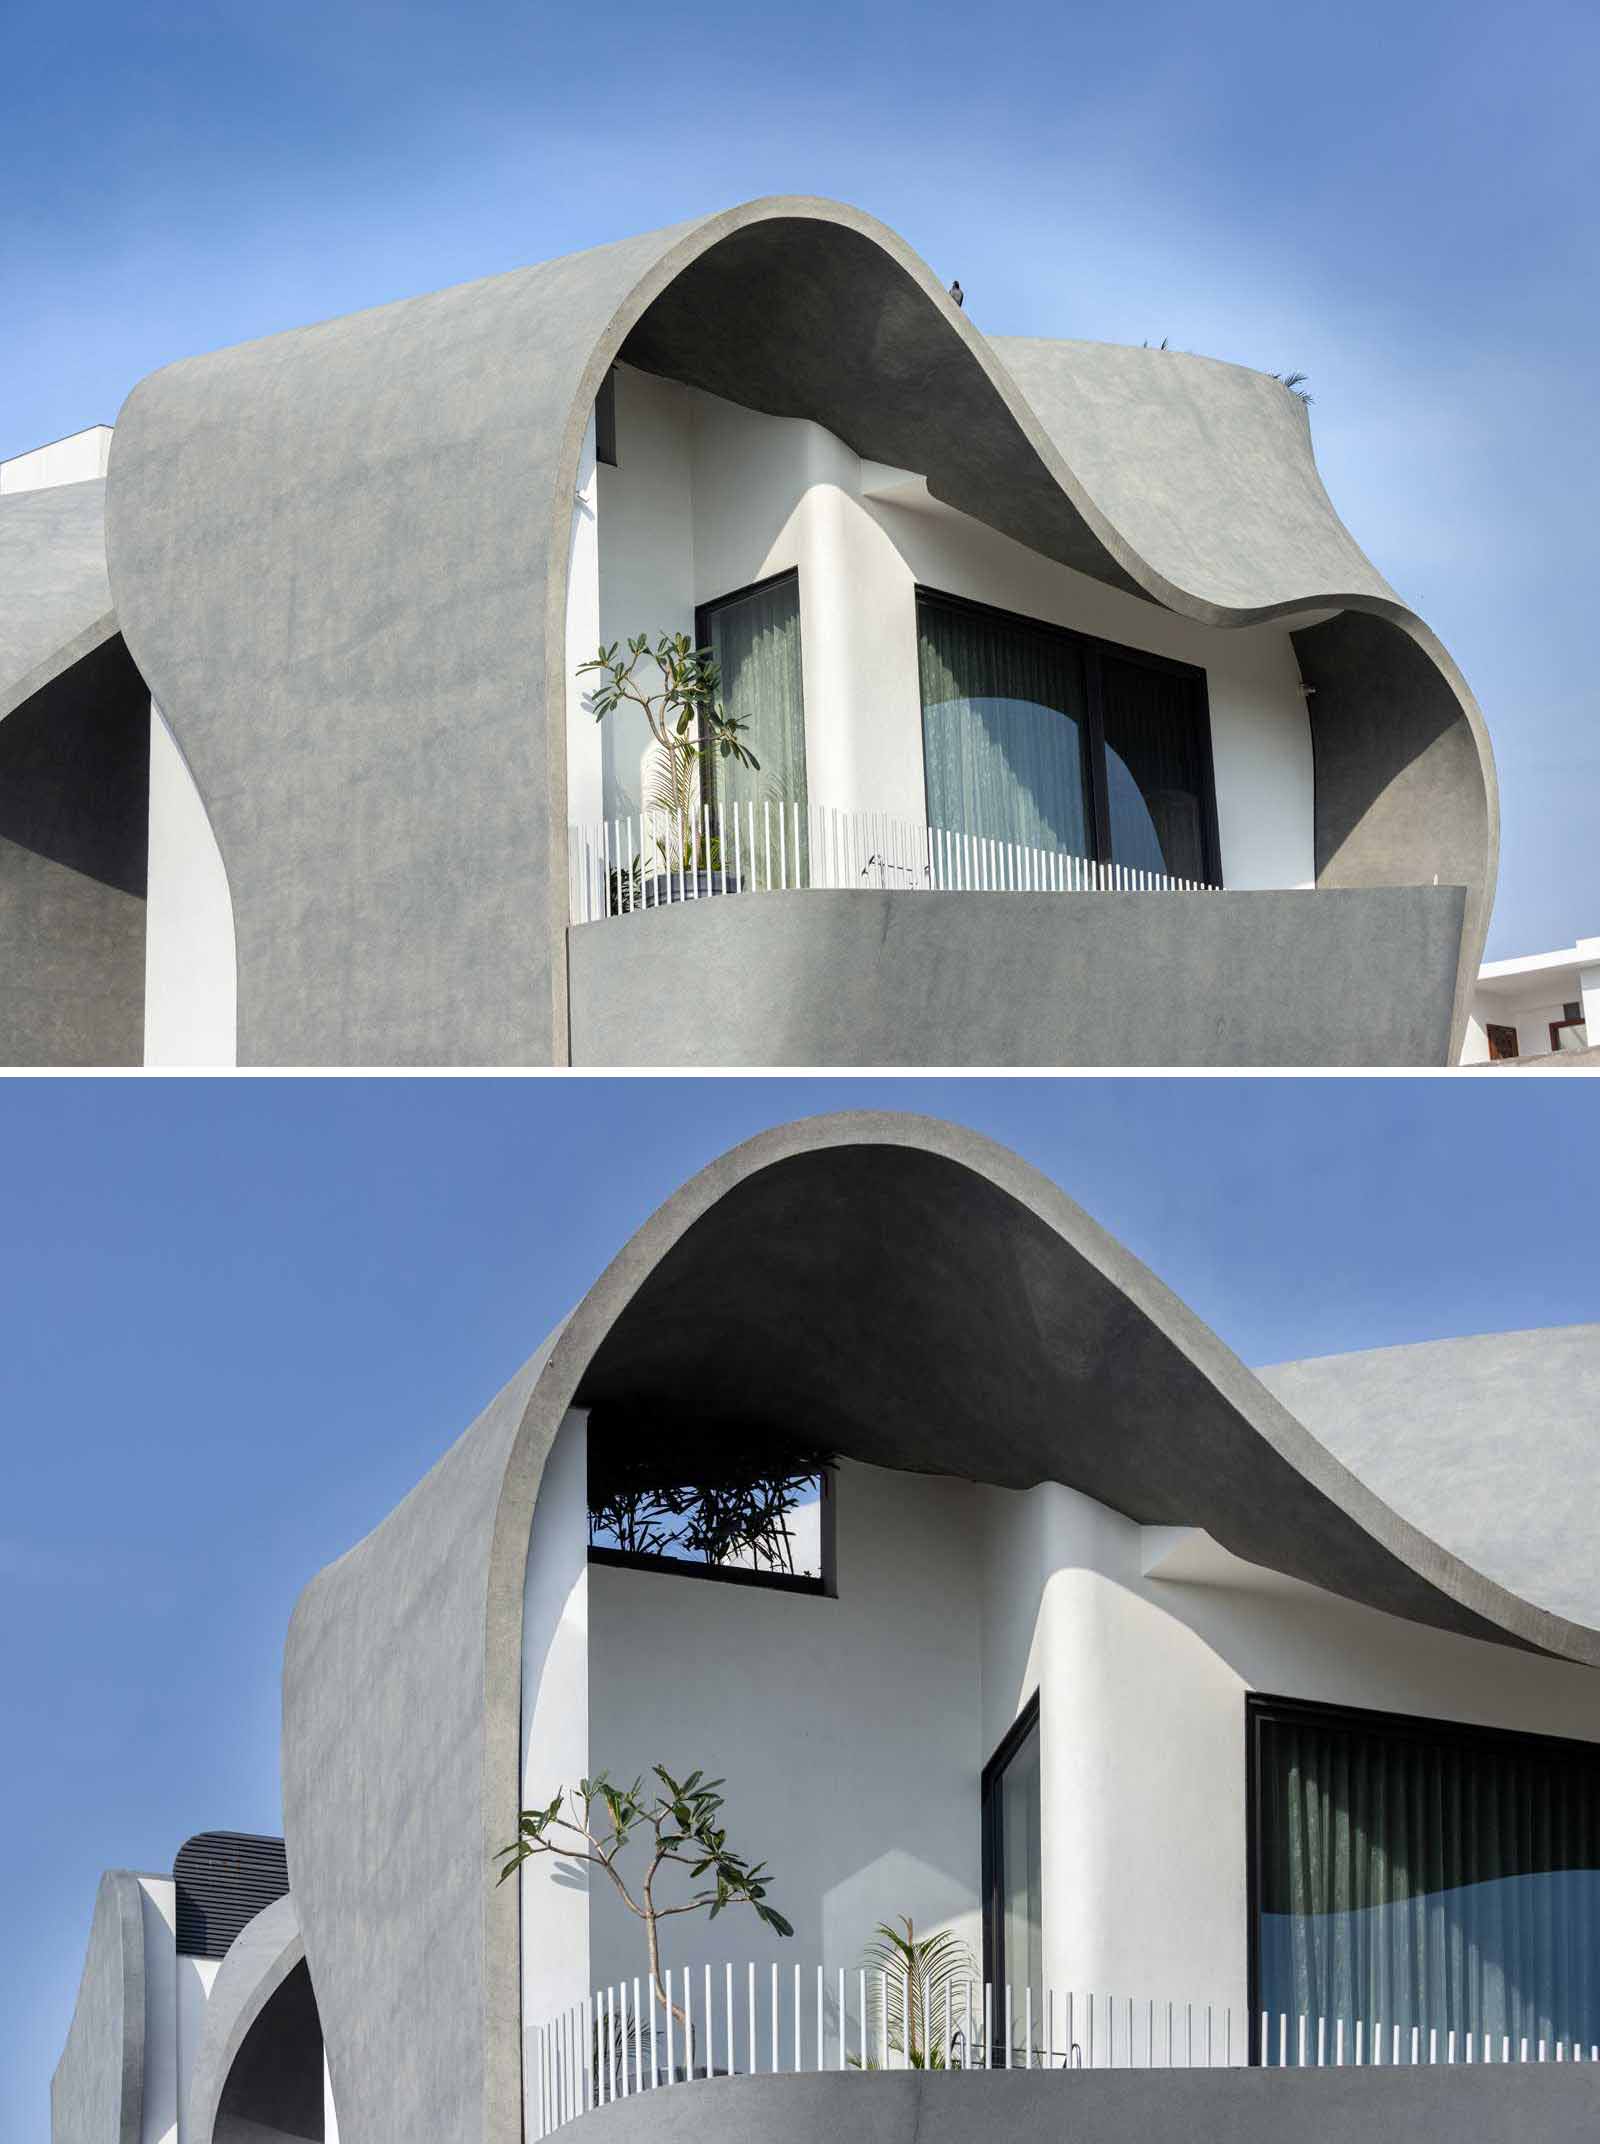 A modern house with a sculptural facade that features ribbon-inspired free-flowing concrete.